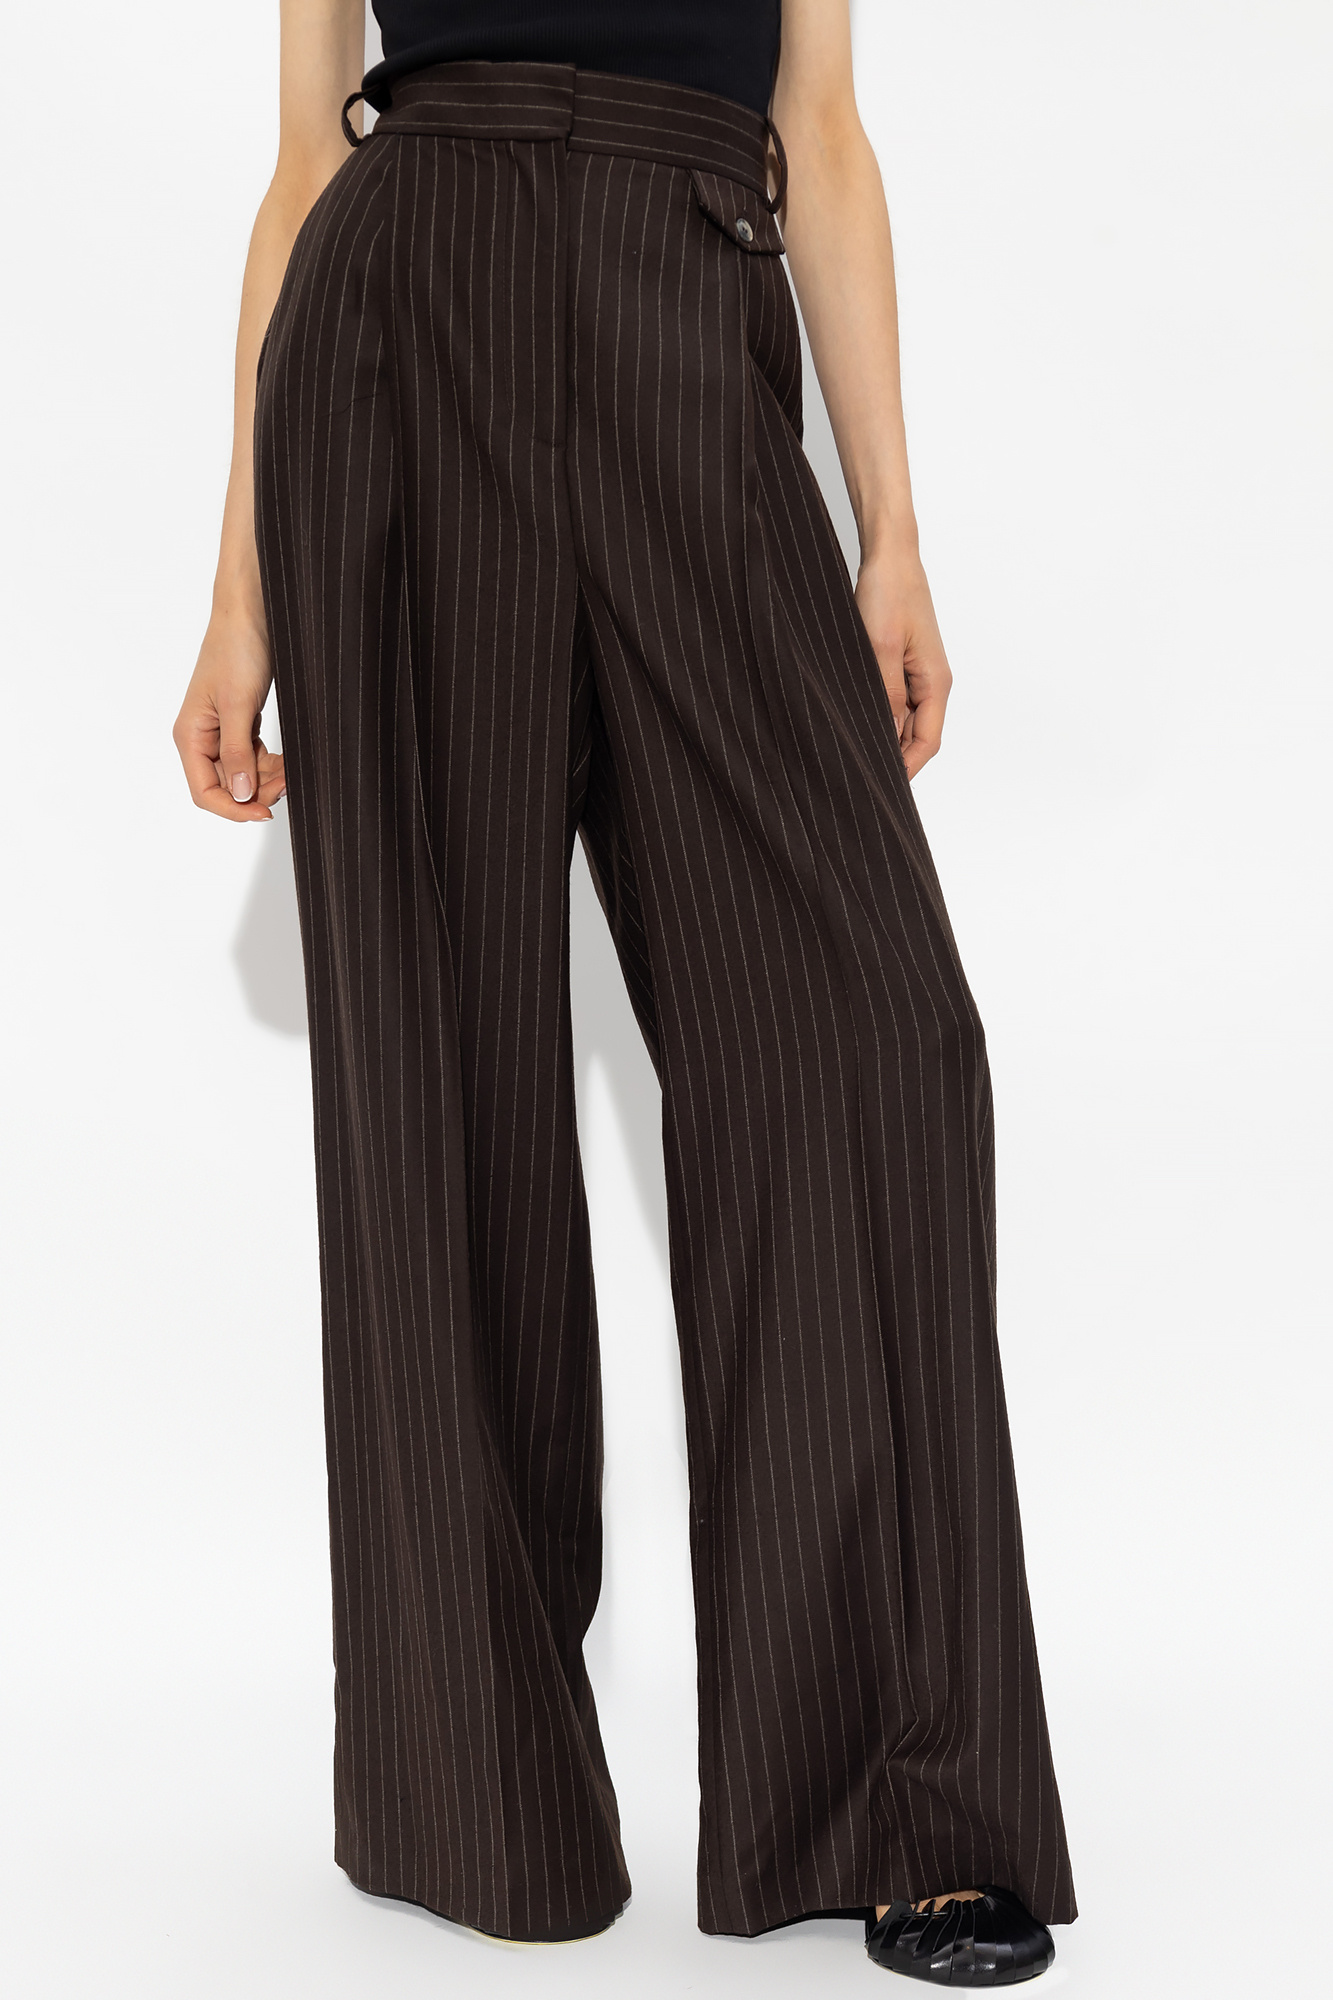 The Mannei ‘Jafr’ pleat-front and trousers